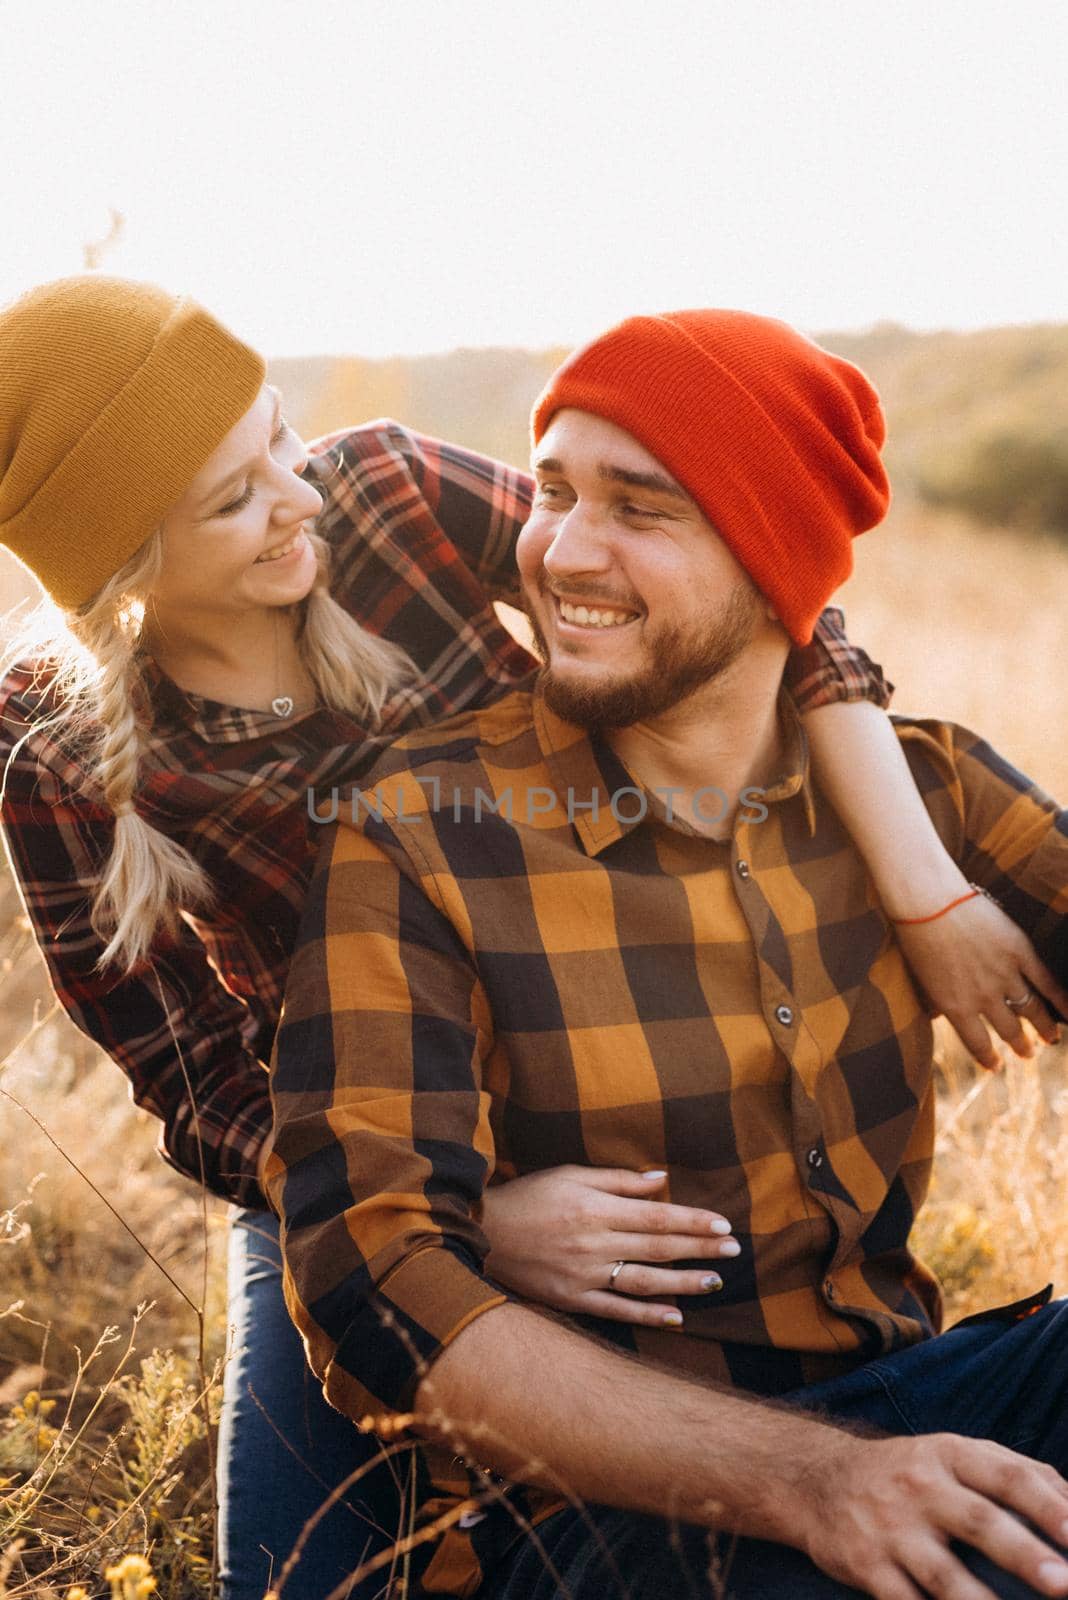 Cheerful guy and girl on a walk in bright knitted hats by Andreua